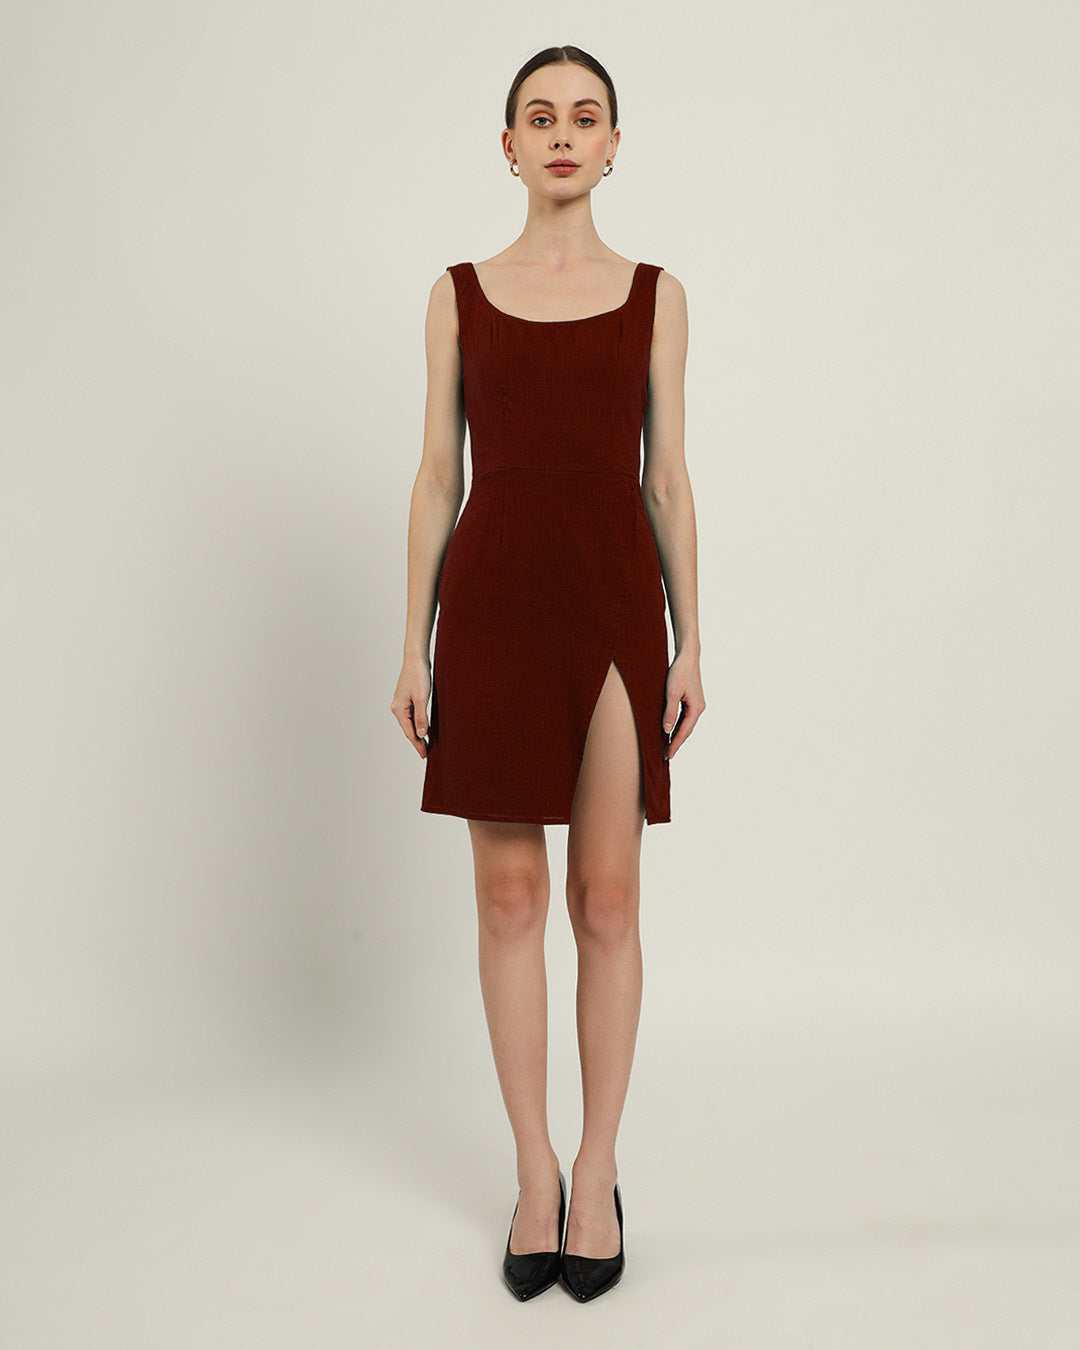 The Cannes Rouge Cotton Dress